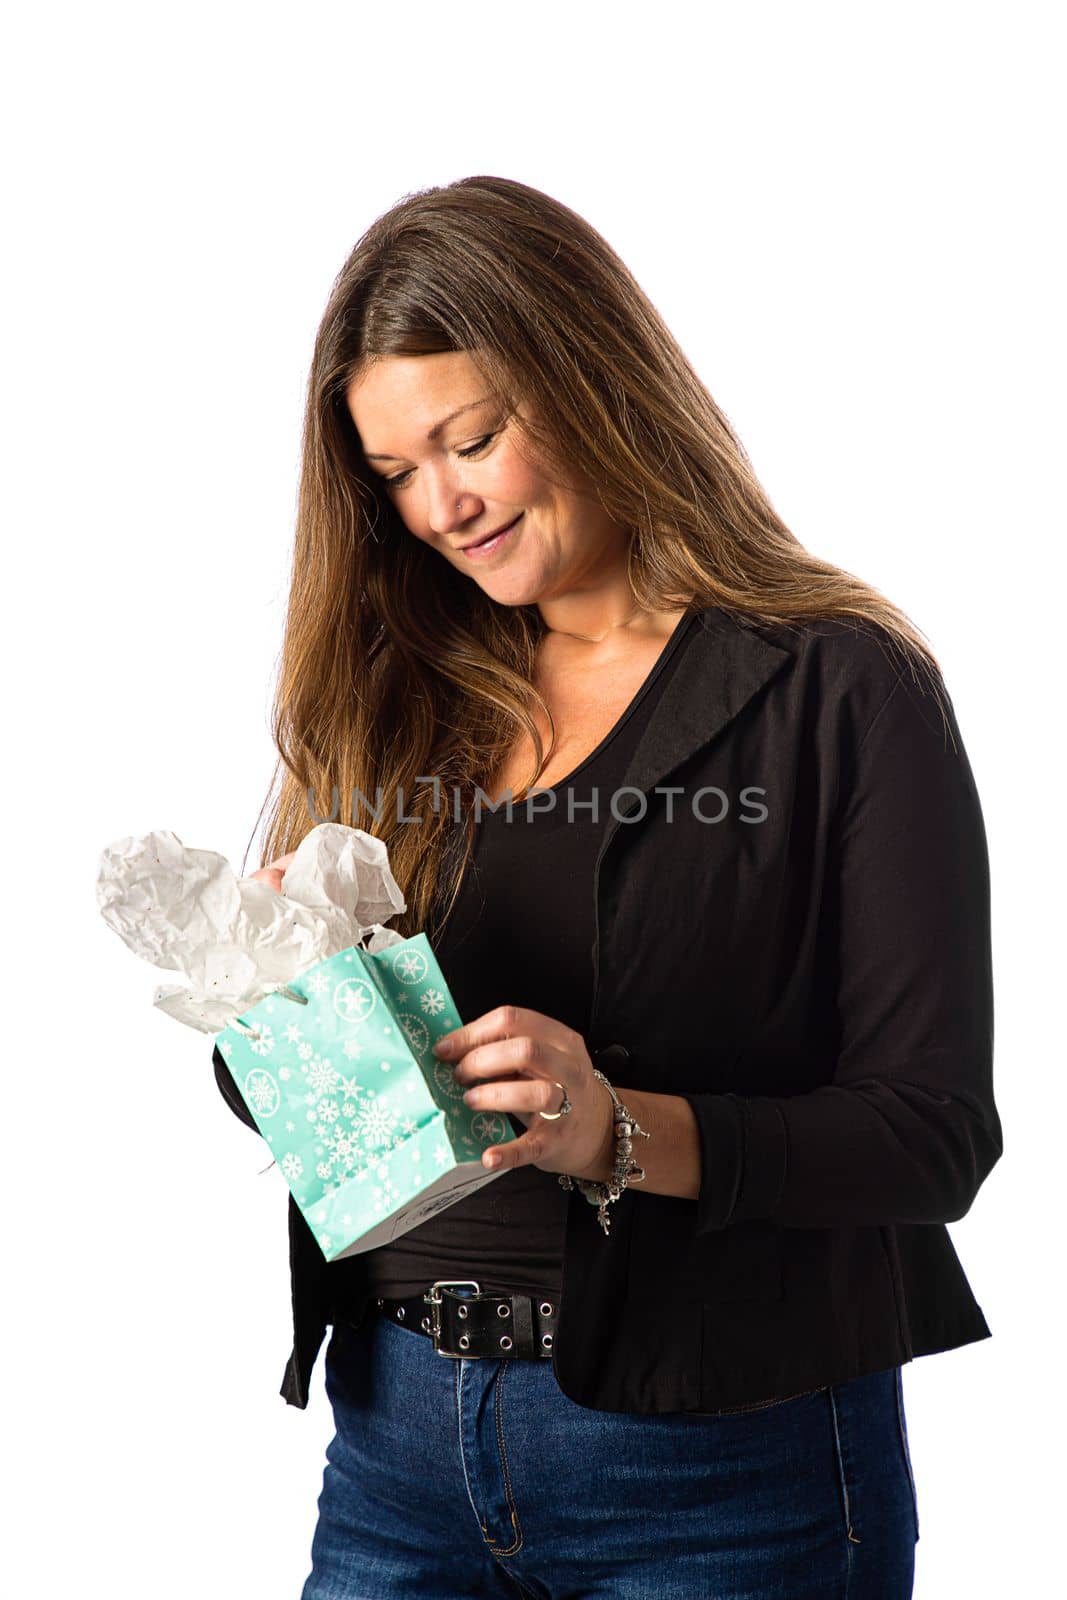 Isolated portrait of a forty year old woman in a sport coat, opening a gift bag